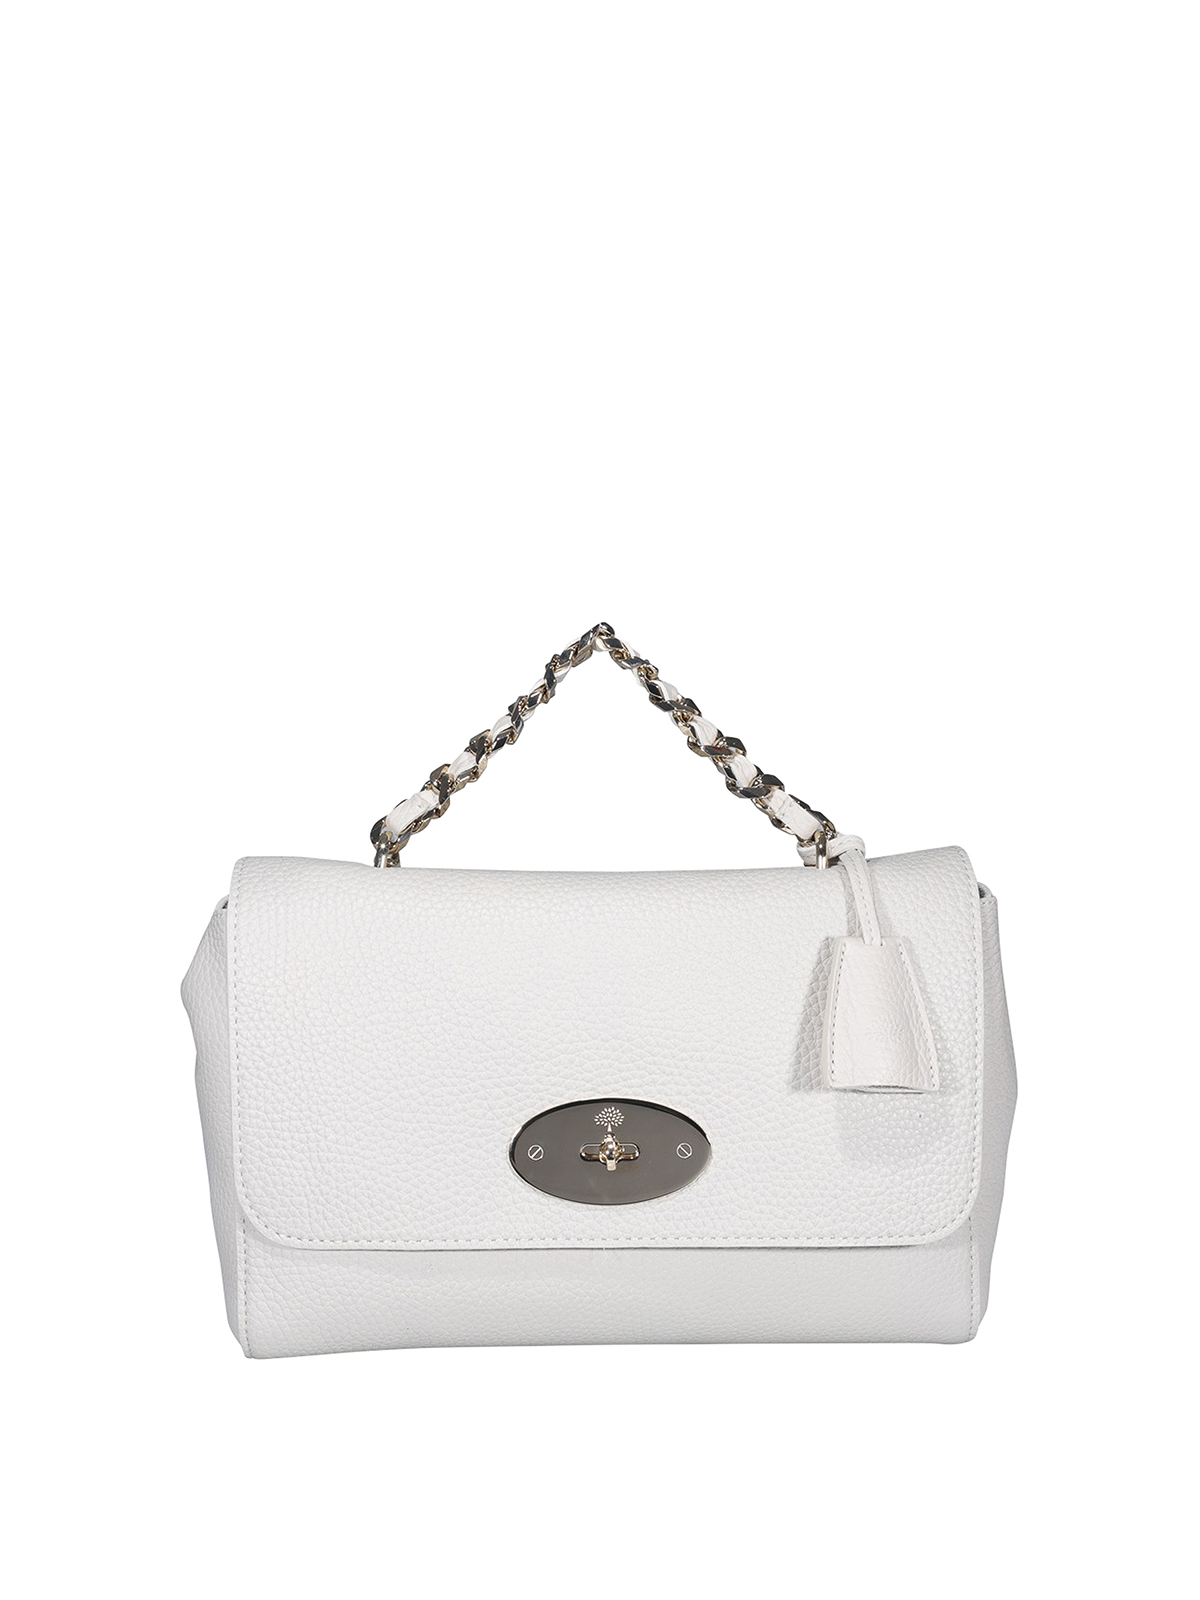 Mulberry Leather Tote In White